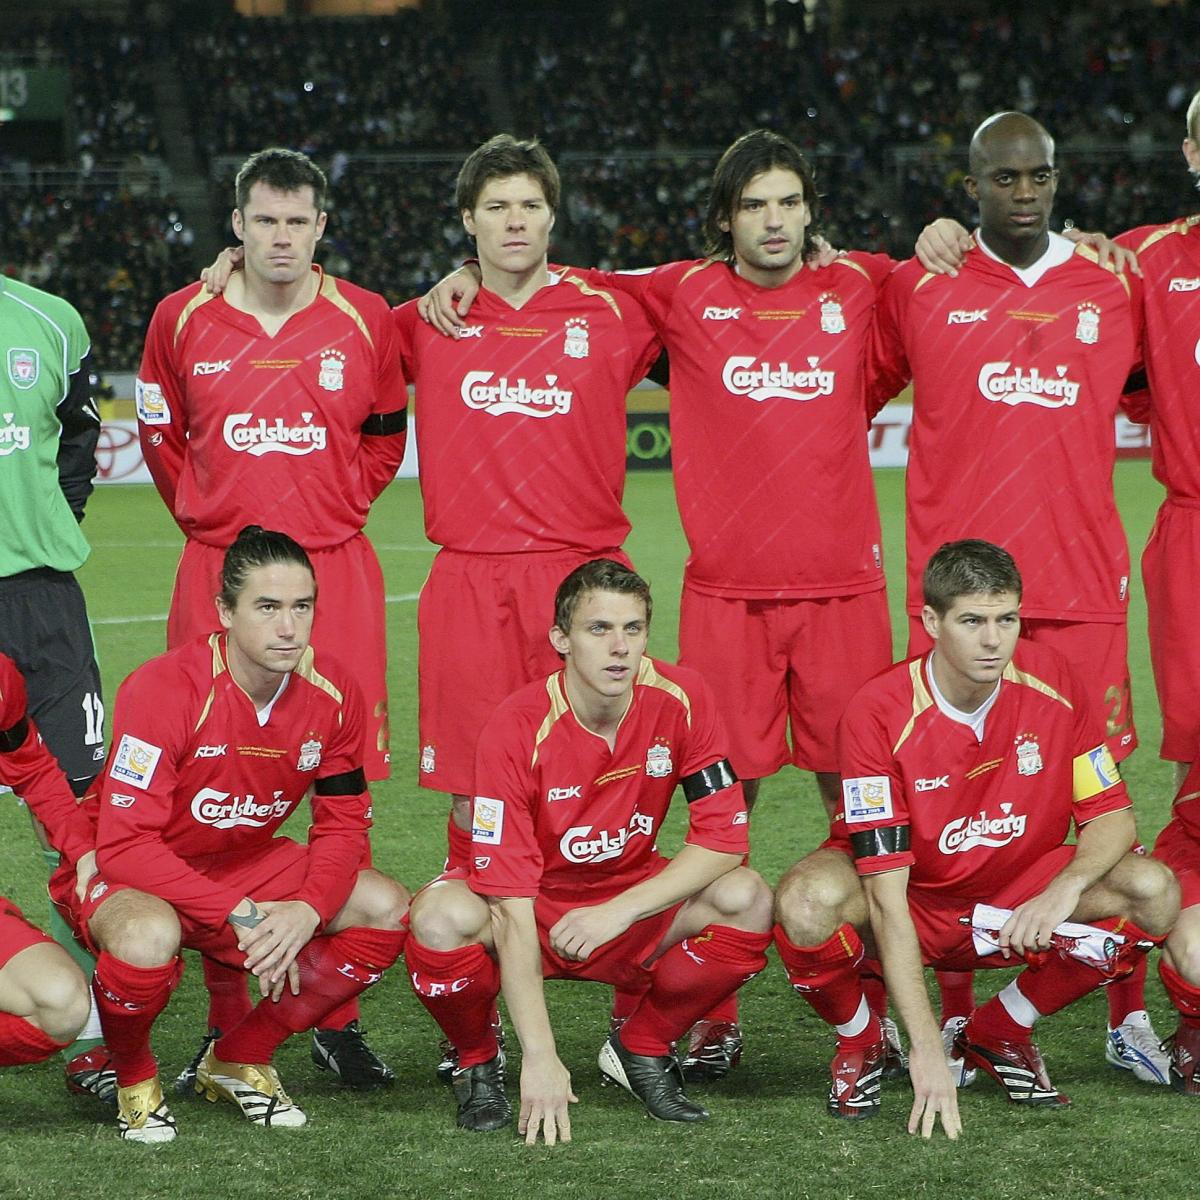 Luis Garcia: 'Everything Came Together' For Liverpool In 2005 